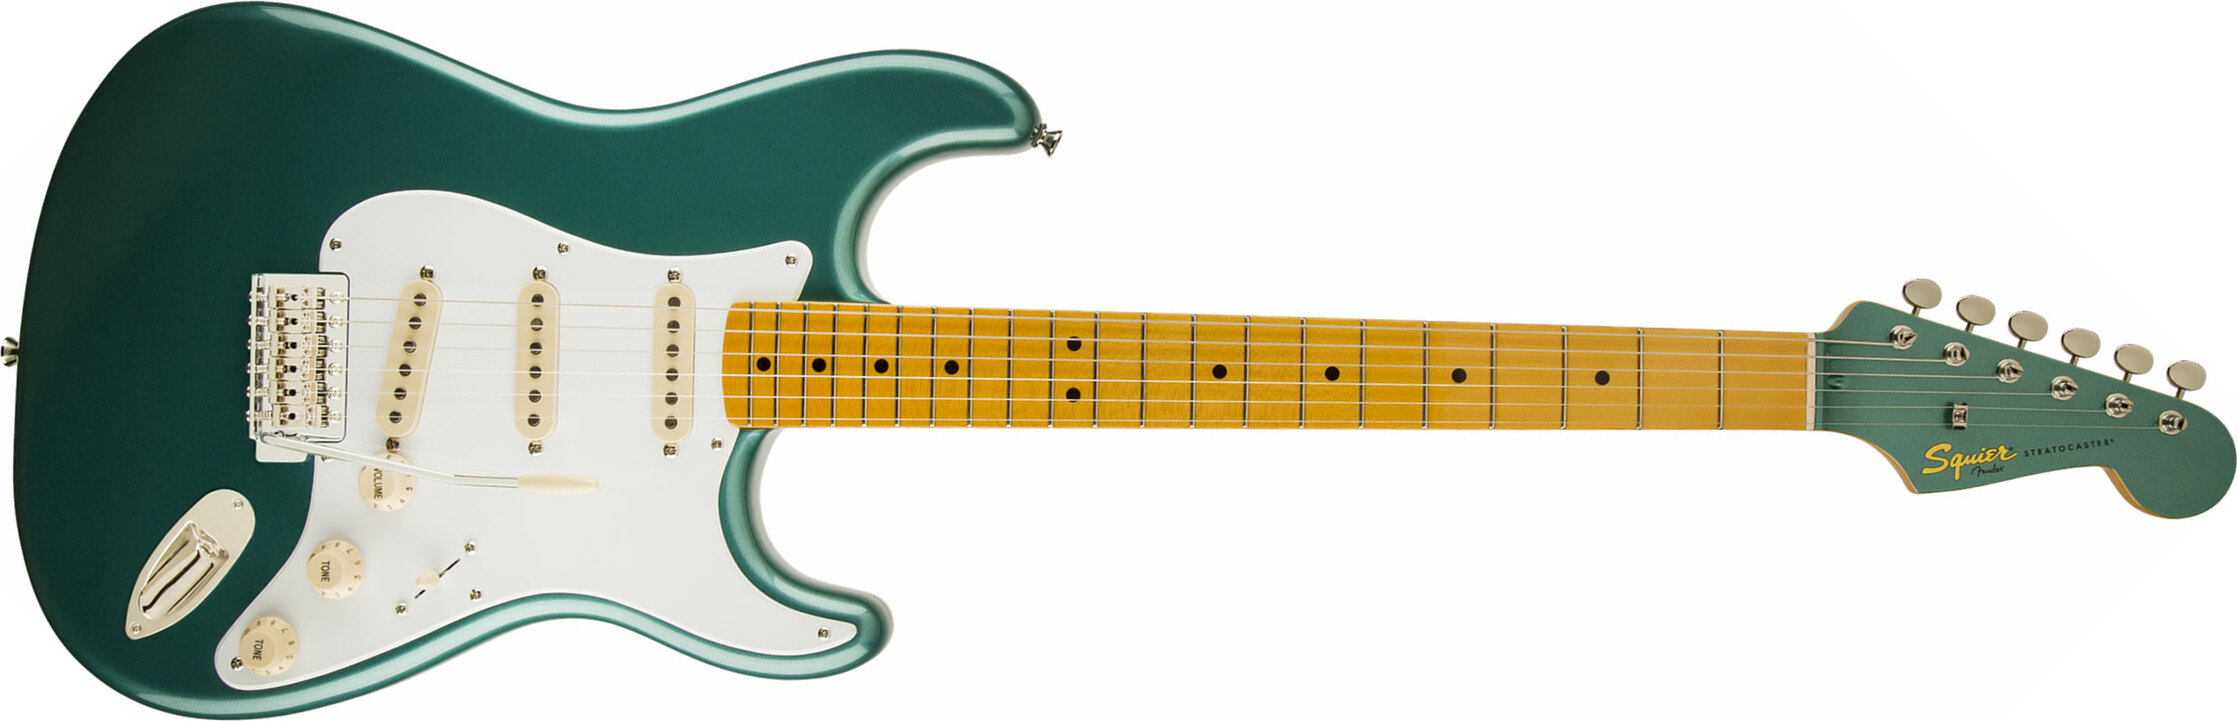 Squier Strat Classic Vibe '50s Mn - Sherwood Green Metallic - Str shape electric guitar - Main picture